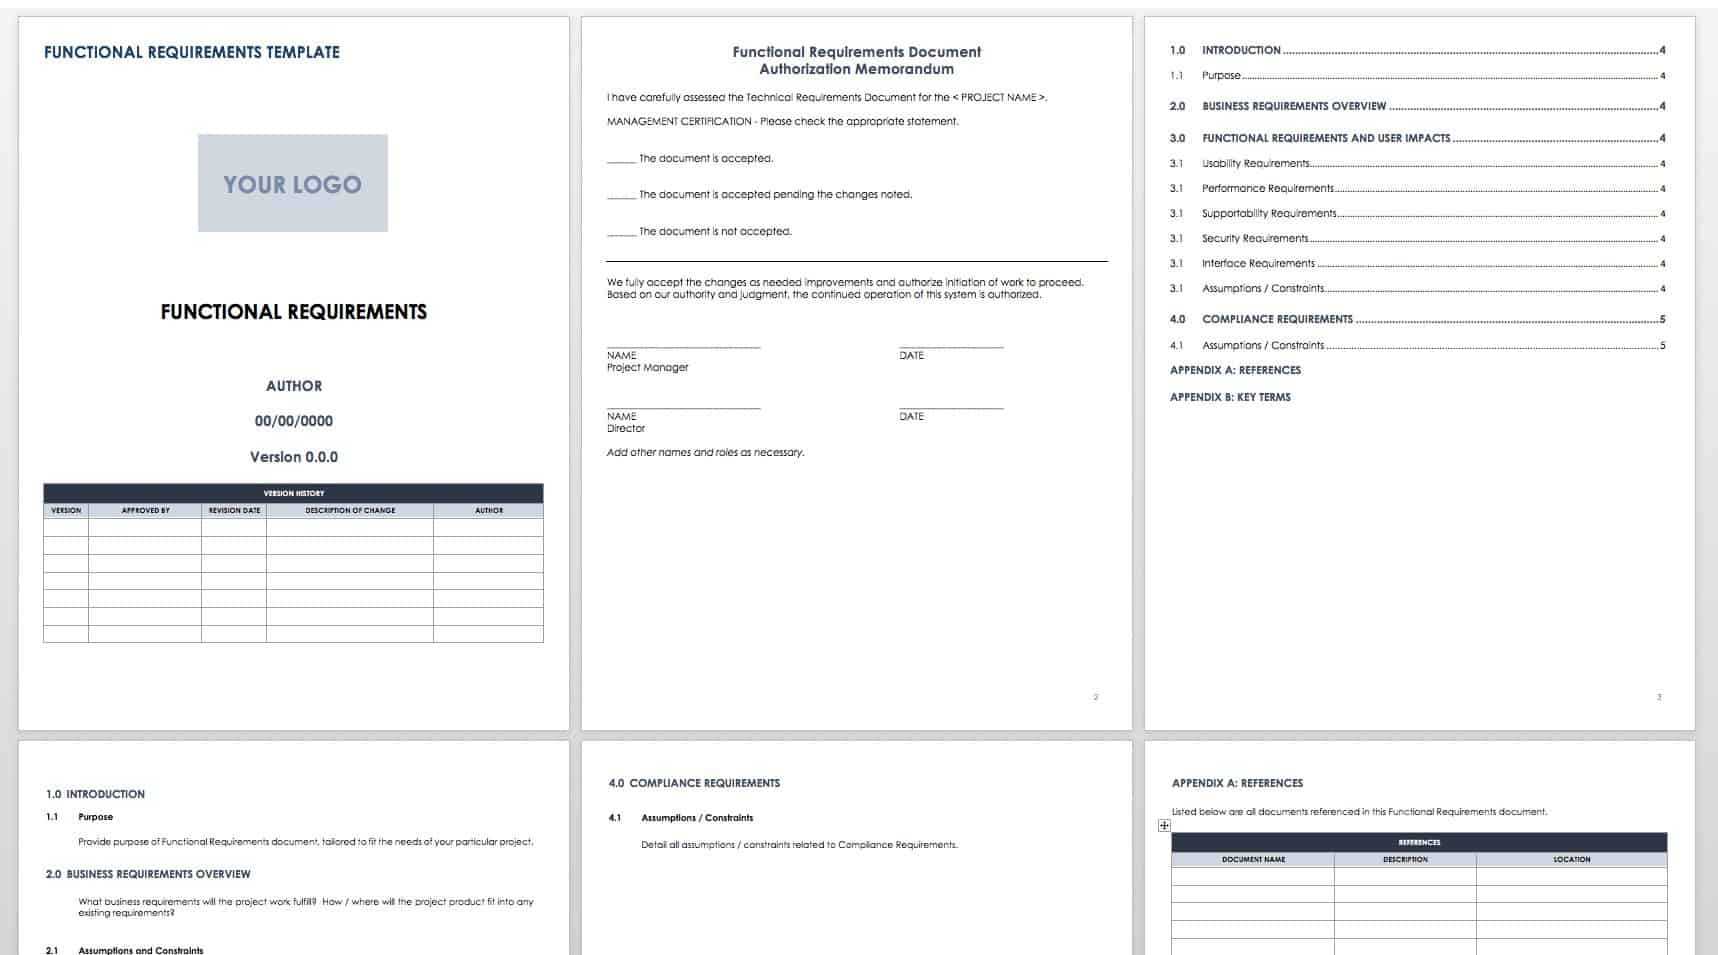 Free Functional Specification Templates | Smartsheet For Report Requirements Document Template